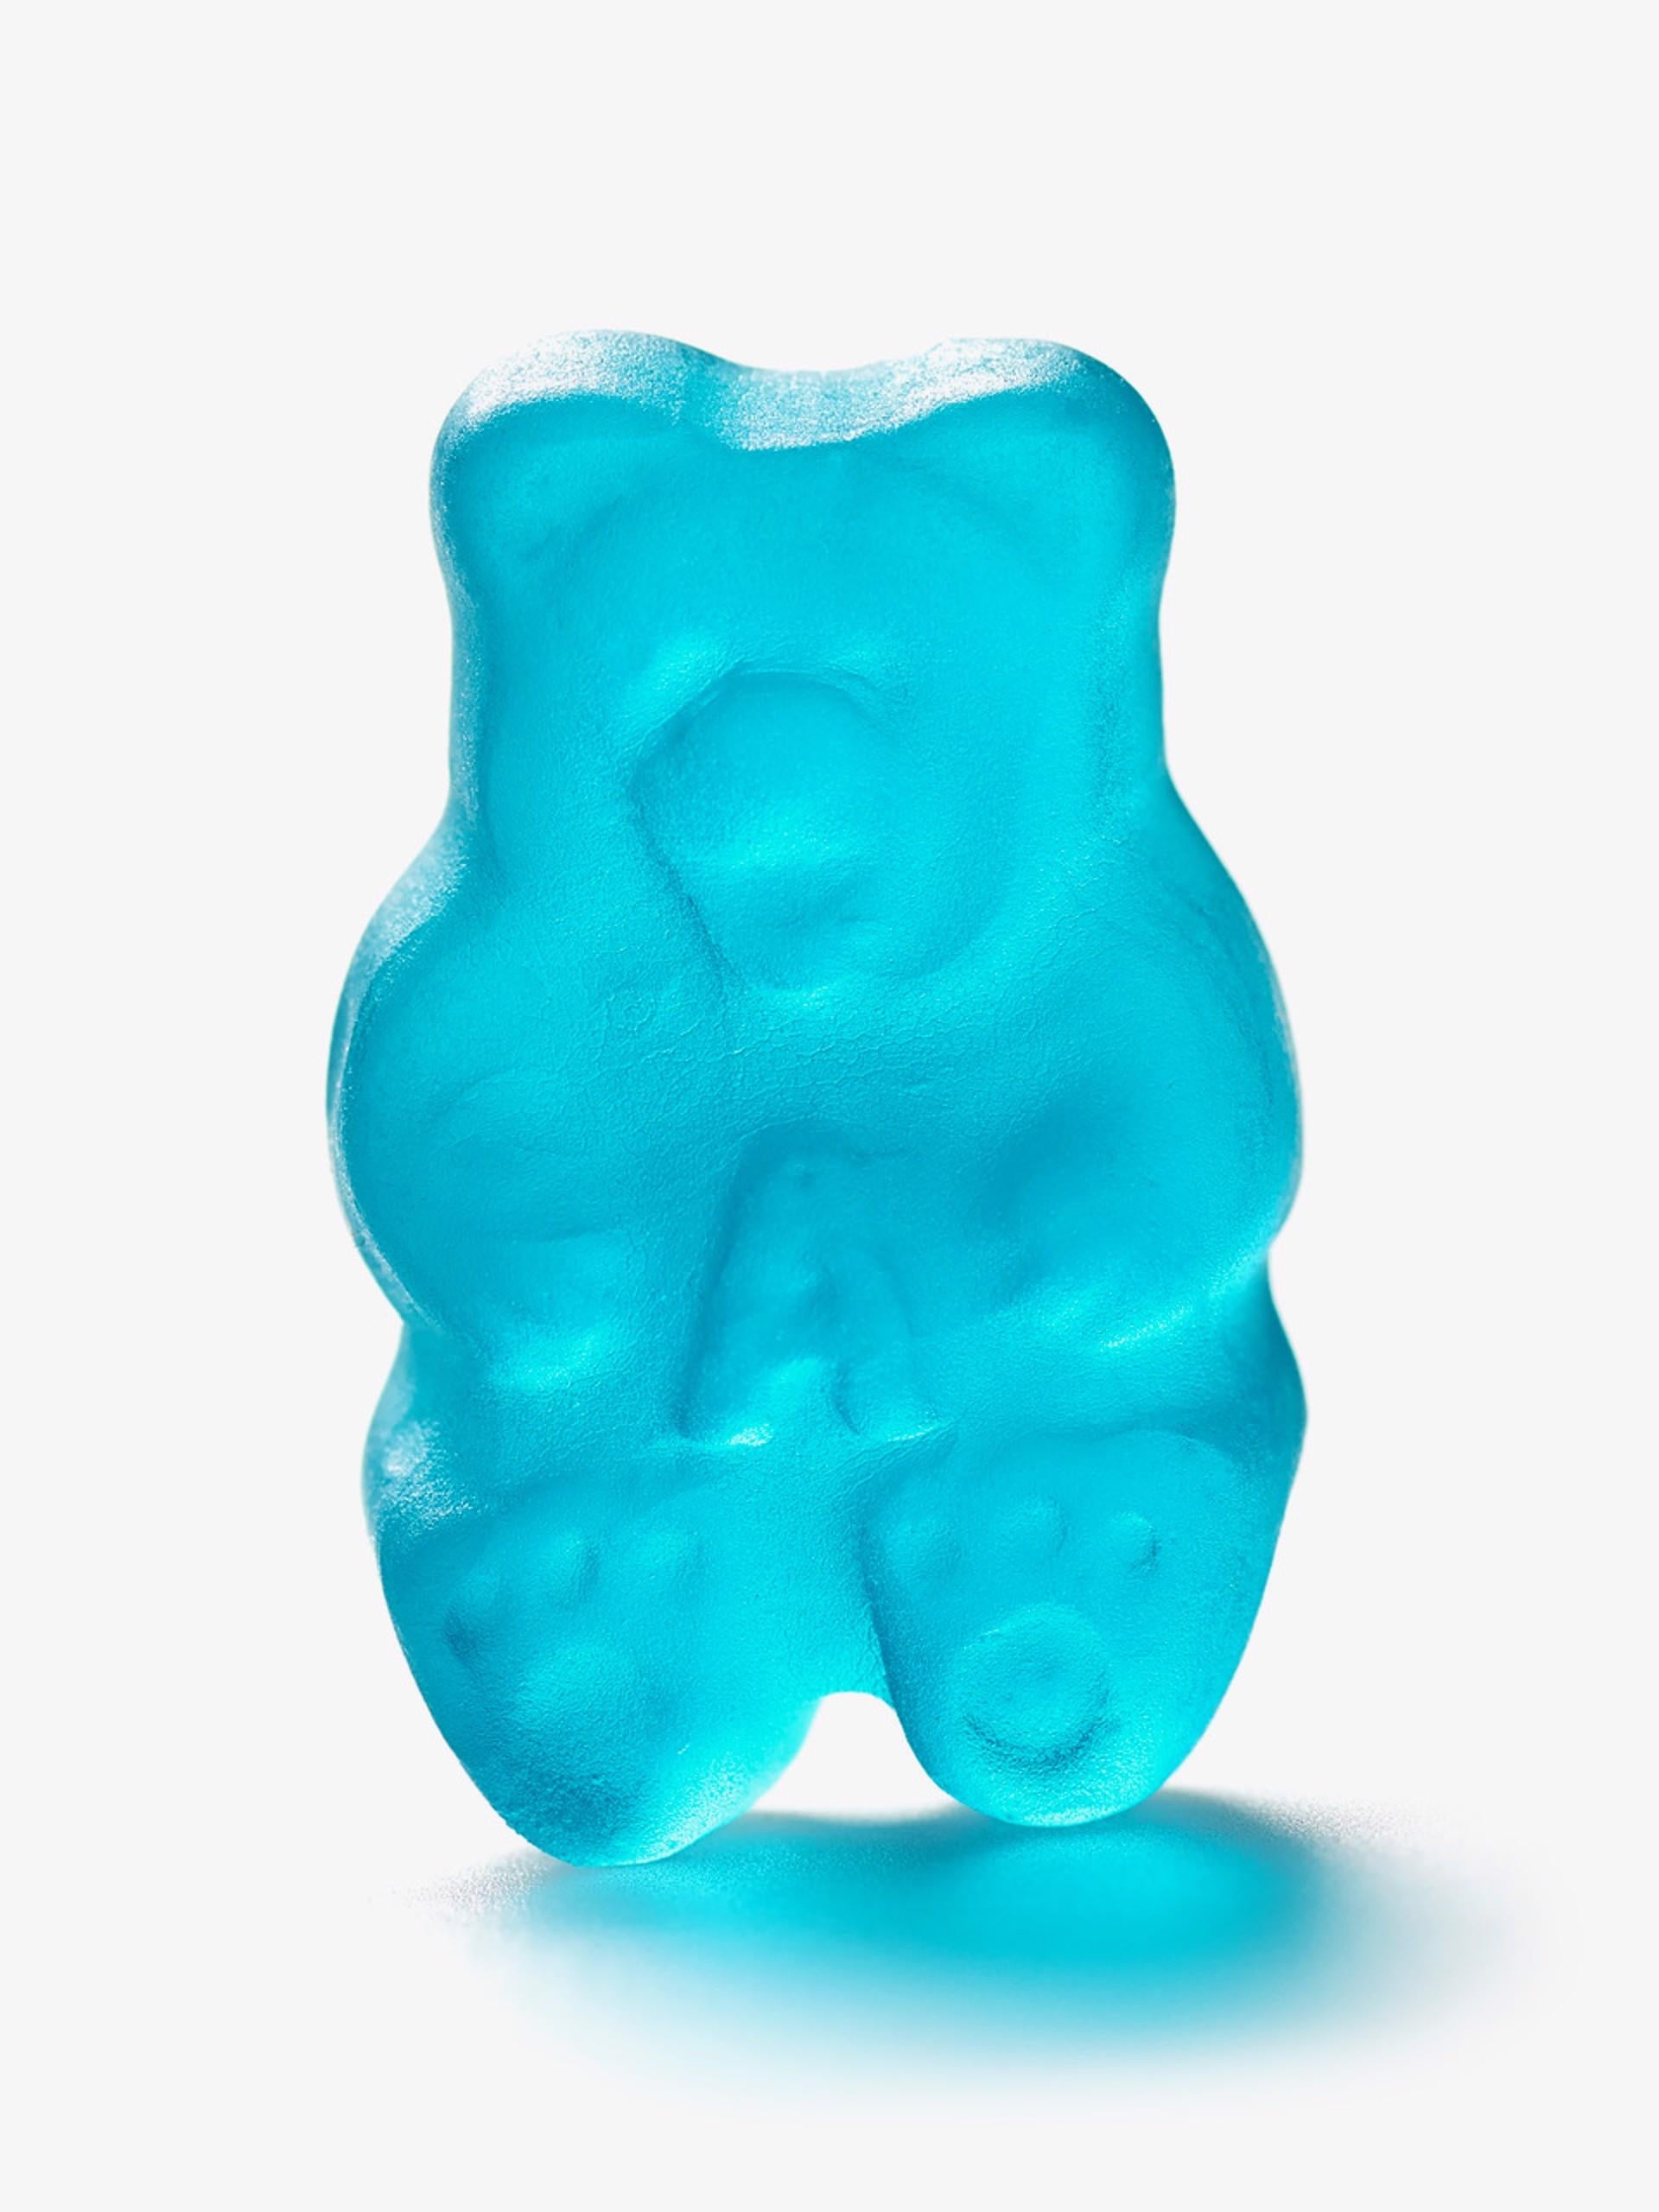 Gummy Bear Blue
Digital C-Print / Archival Pigment Print
Edition of 5 per size
Available sizes:
24 x 18 in
36 x 24 in
48 x 36 in

Refine Sugar Collection.

This photograph will be printed once payment has been received and will ship directly from